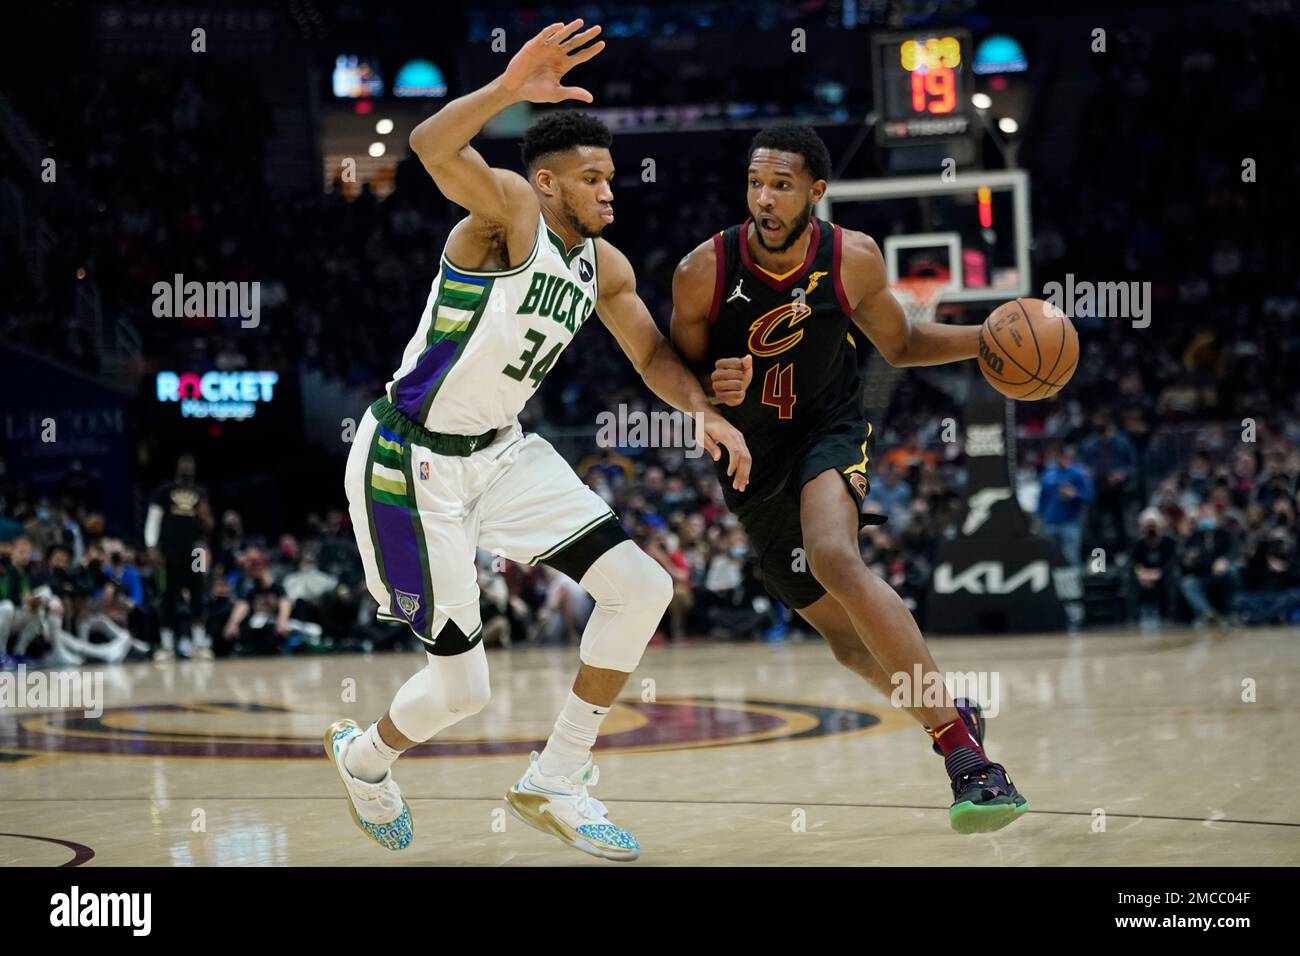 Cleveland Cavaliers' Evan Mobley (4) drives against Oklahoma City Thunder's Darius  Bazley (7) in the first half of an NBA basketball game, Saturday, Jan. 22,  2022, in Cleveland. (AP Photo/Tony Dejak Stock Photo - Alamy